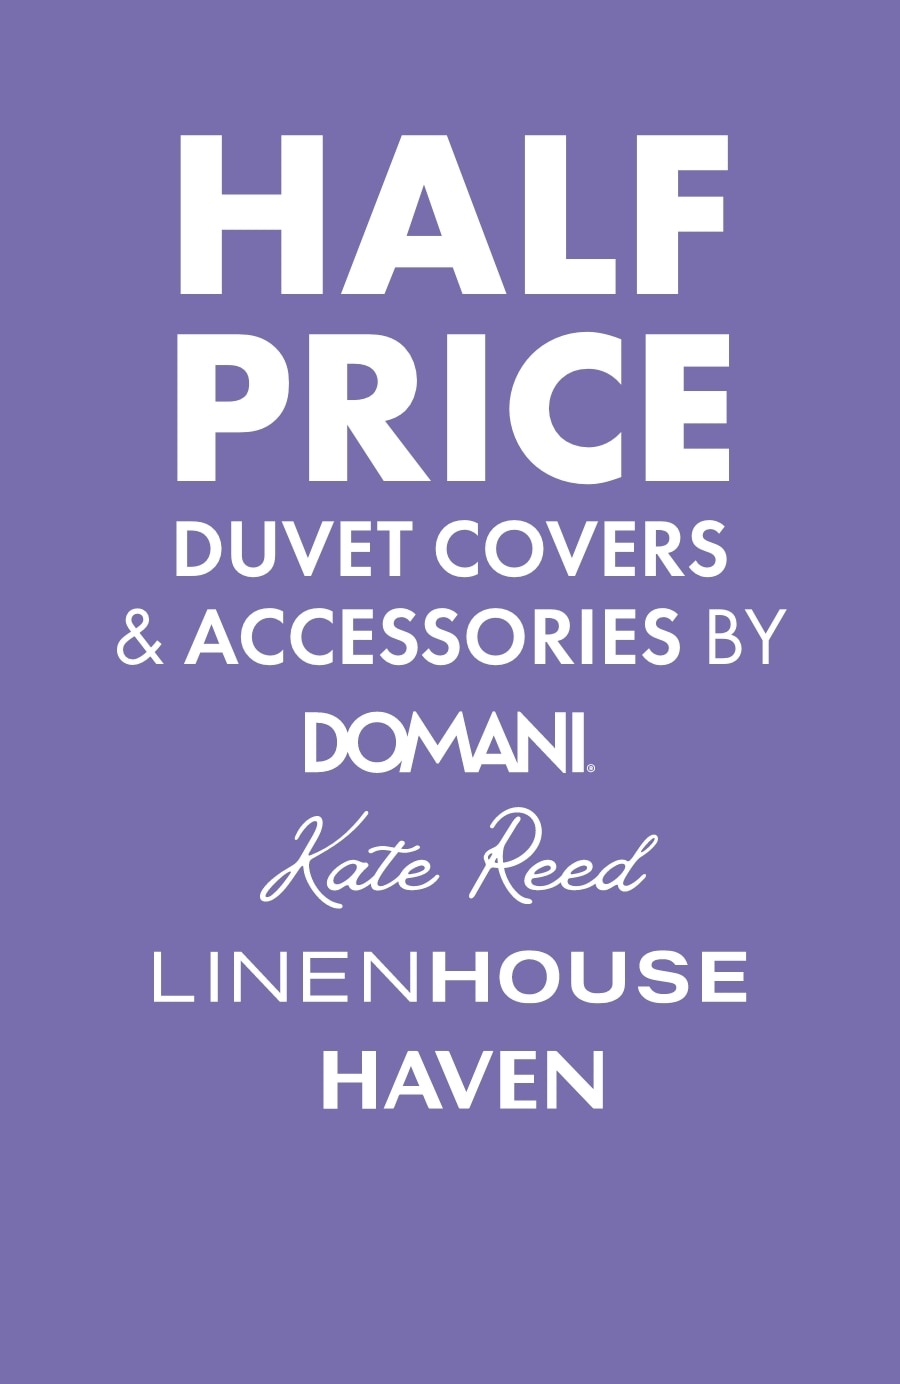 Half Price Sheets Duvet Covers & Accessories by Domani